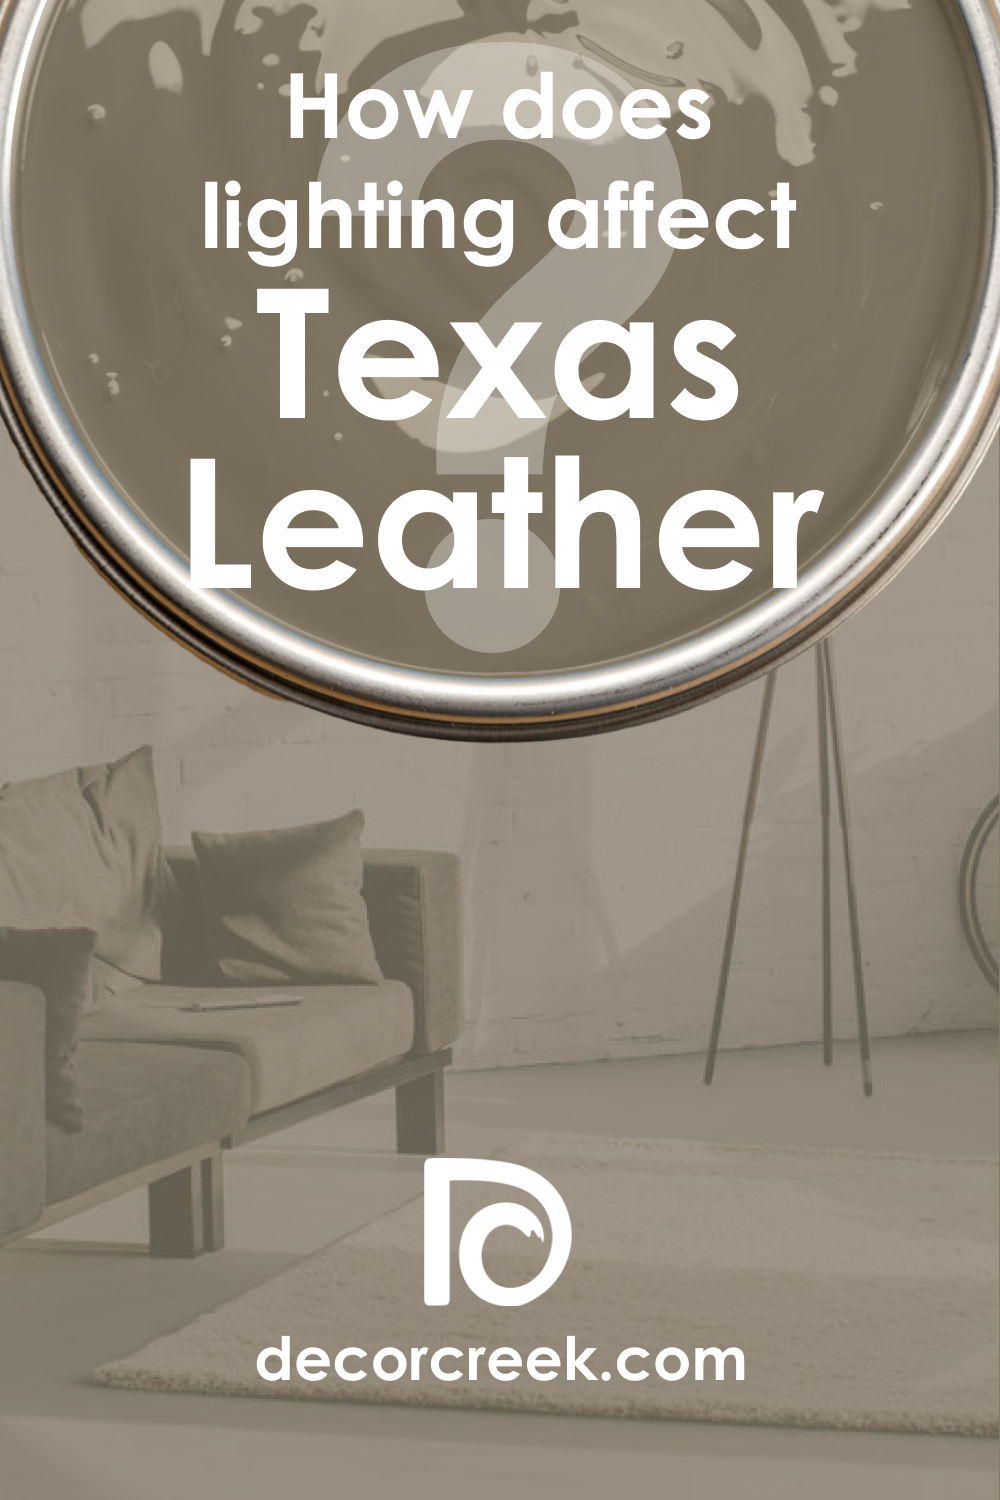 How Does Lighting Affect Texas Leather AC-3?